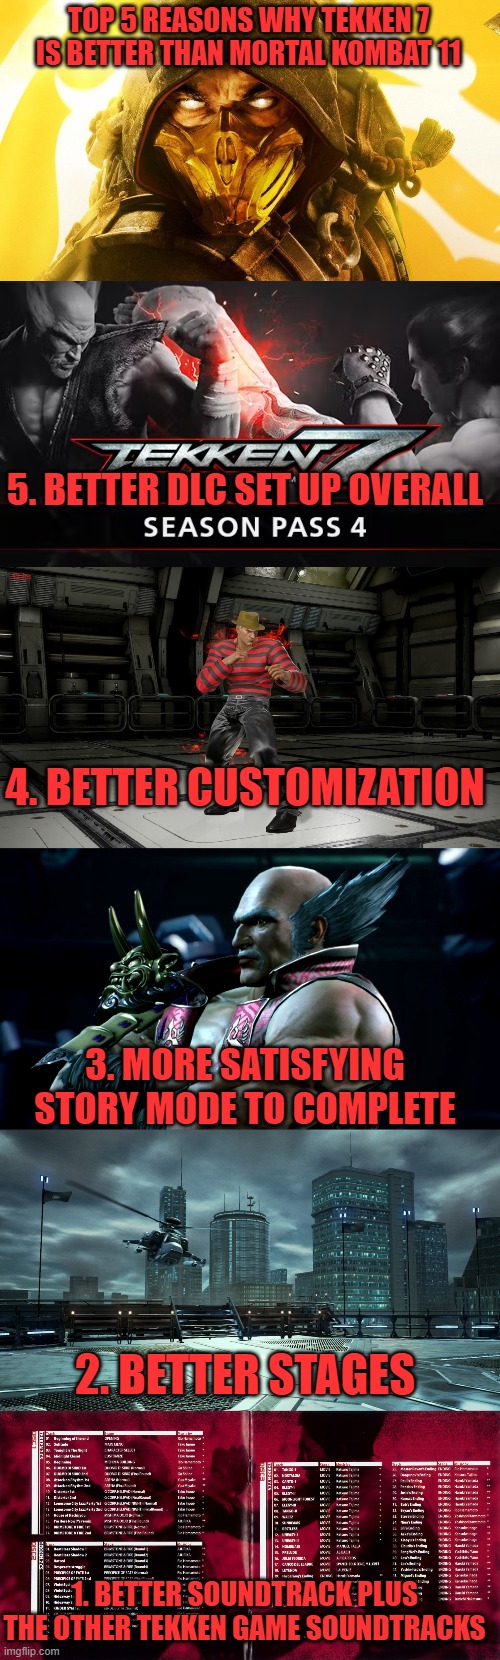 TOP 5 REASONS WHY TEKKEN 7 IS BETTER THAN MORTAL KOMBAT 11; 5. BETTER DLC SET UP OVERALL; 4. BETTER CUSTOMIZATION; 3. MORE SATISFYING STORY MODE TO COMPLETE; 2. BETTER STAGES; 1. BETTER SOUNDTRACK PLUS THE OTHER TEKKEN GAME SOUNDTRACKS | image tagged in mortal kombat,tekken,fighting,dlcs | made w/ Imgflip meme maker